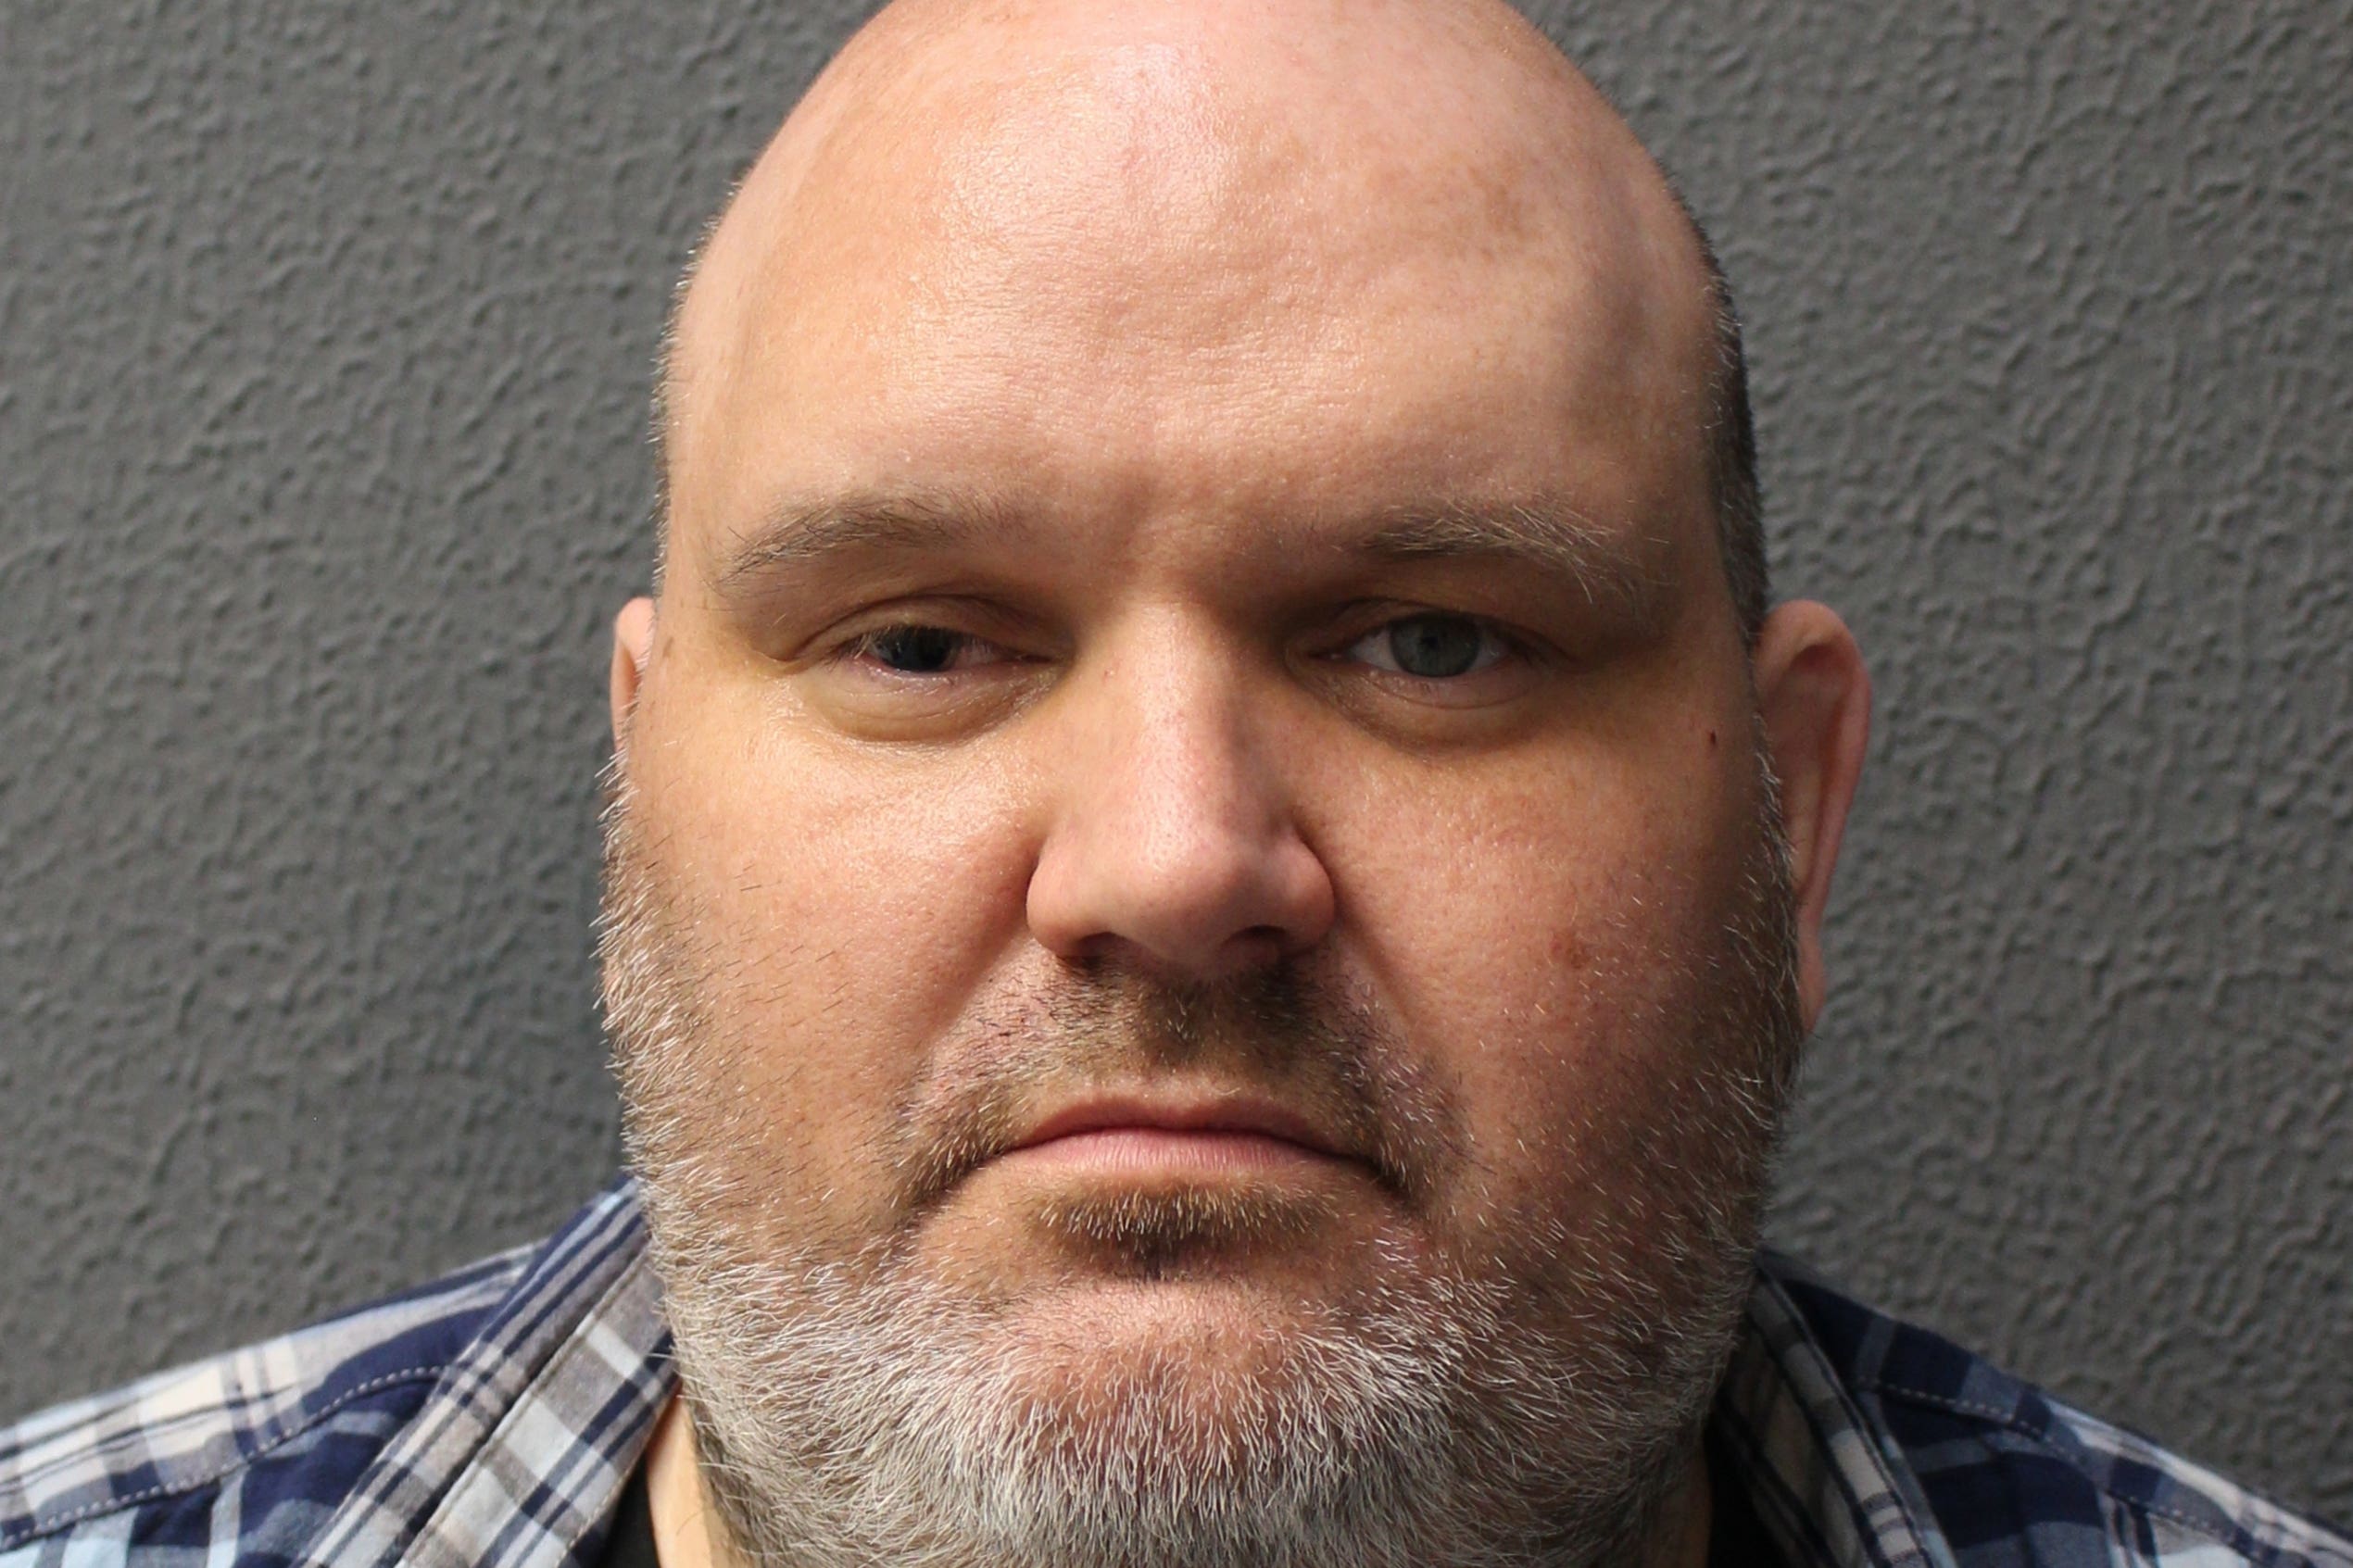 body parts, old bailey, castration, website, sentencing, ‘eunuch maker’ ringleader who had freezer filled with body parts jailed for life